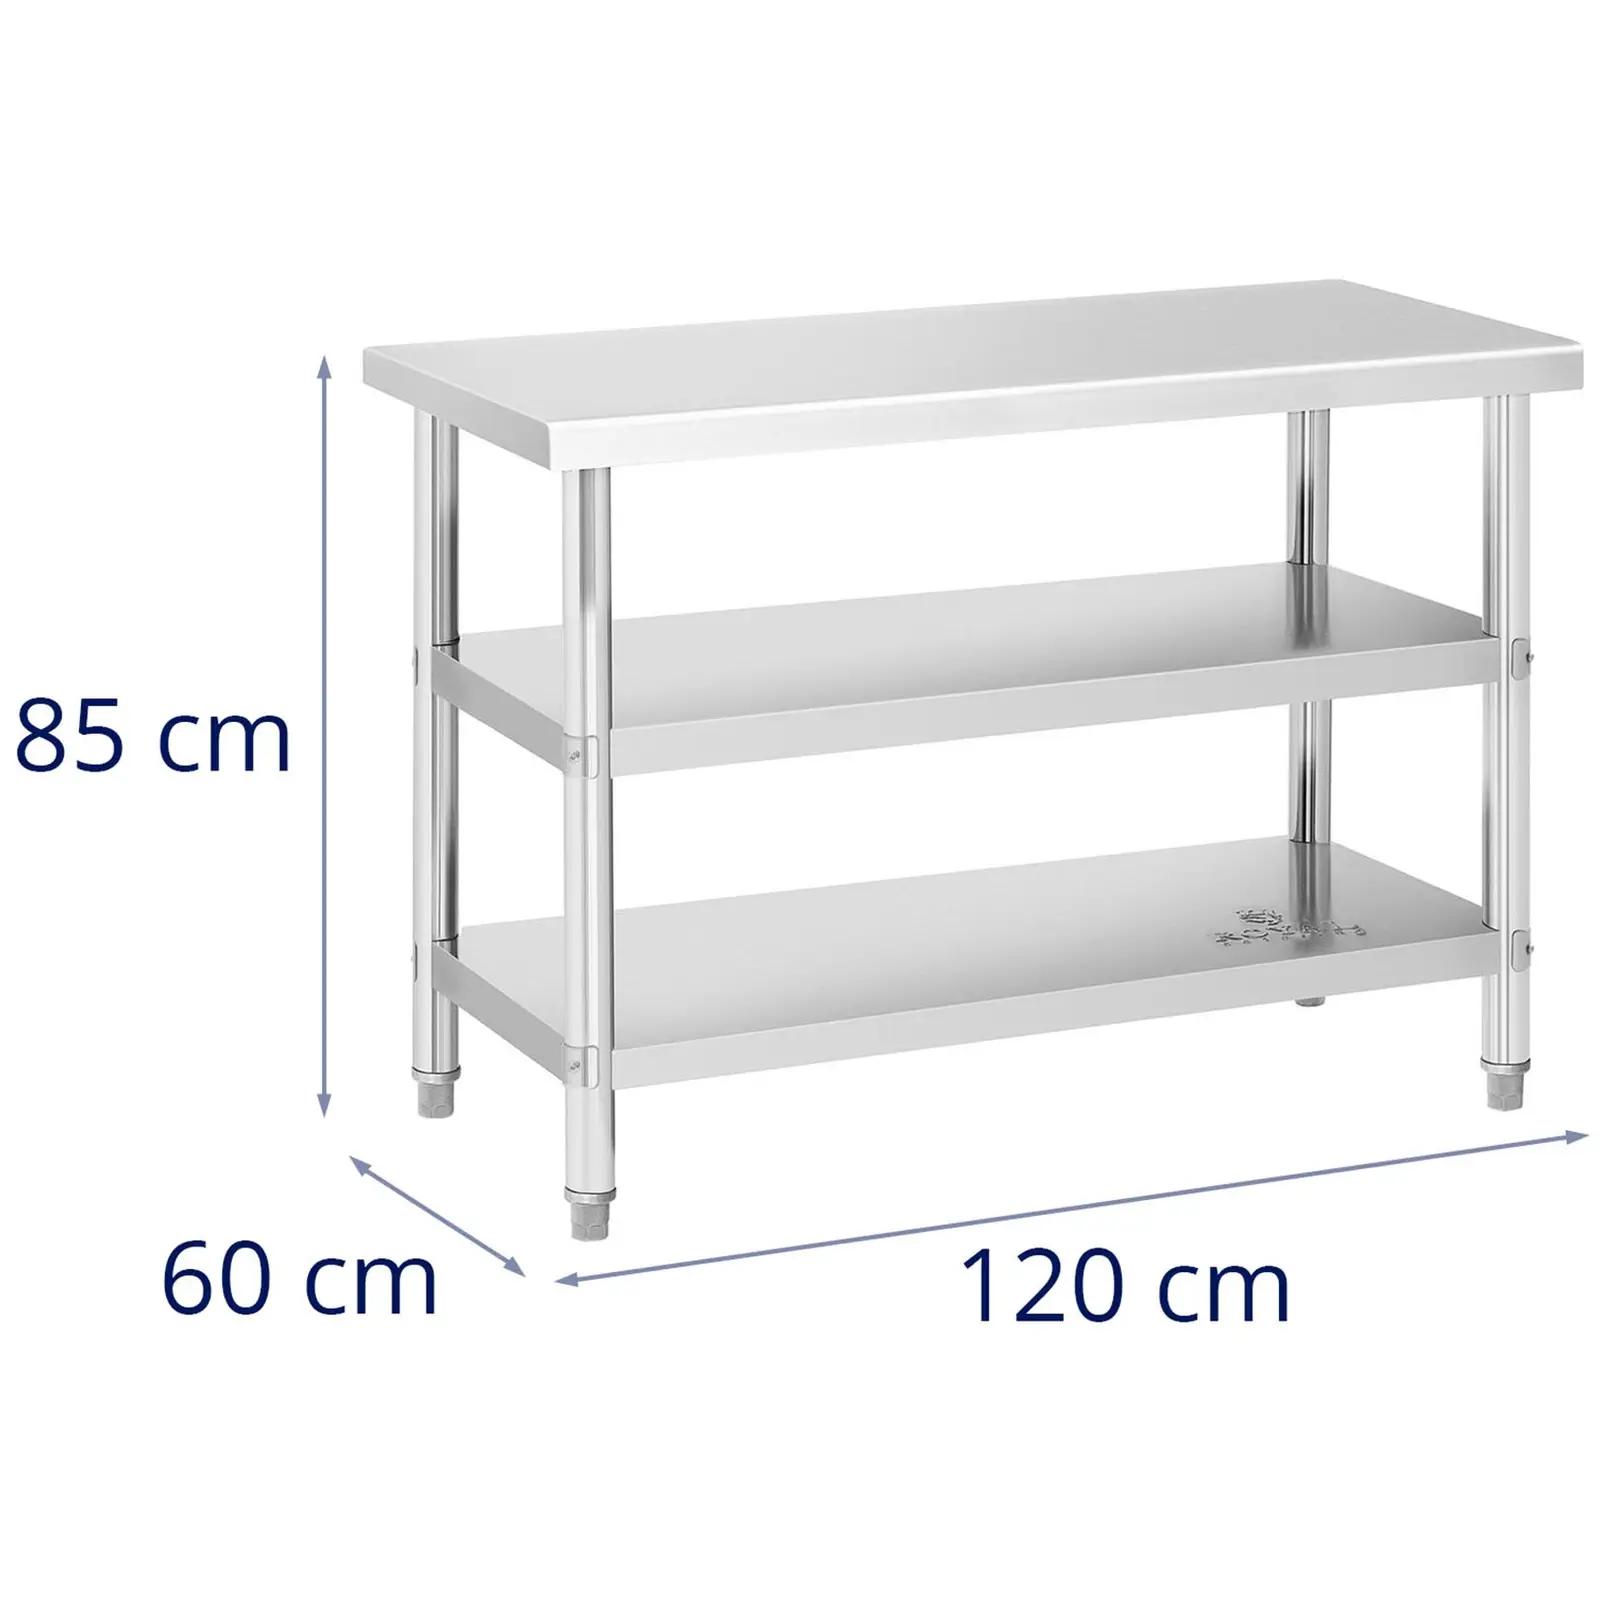 Stainless steel table - 120 x 60 x 5 cm - 200 kg - 2 shelves - Royal Catering